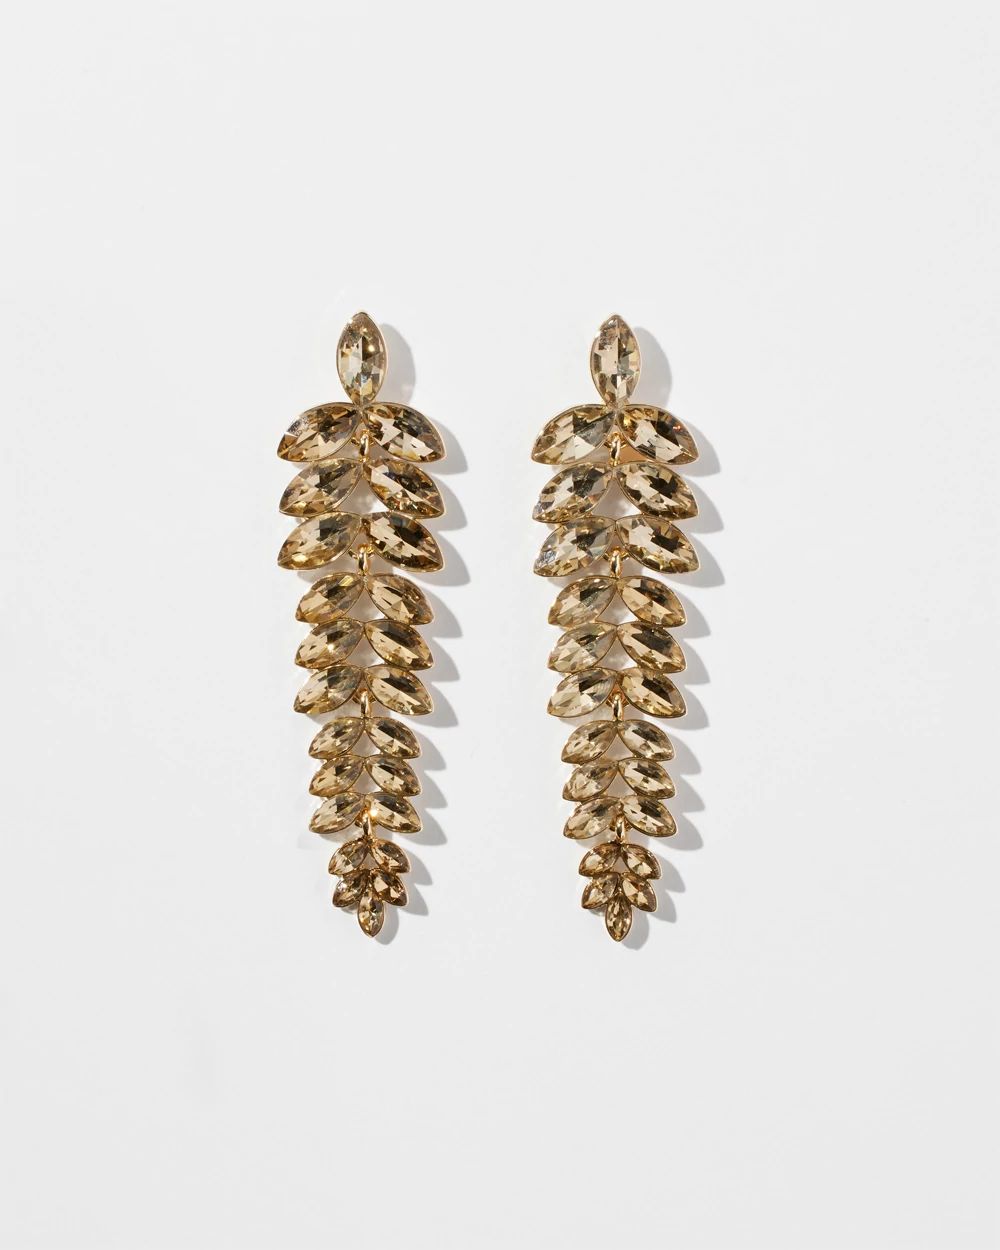 Gold Crystal Leaf Statement Earrings click to view larger image.